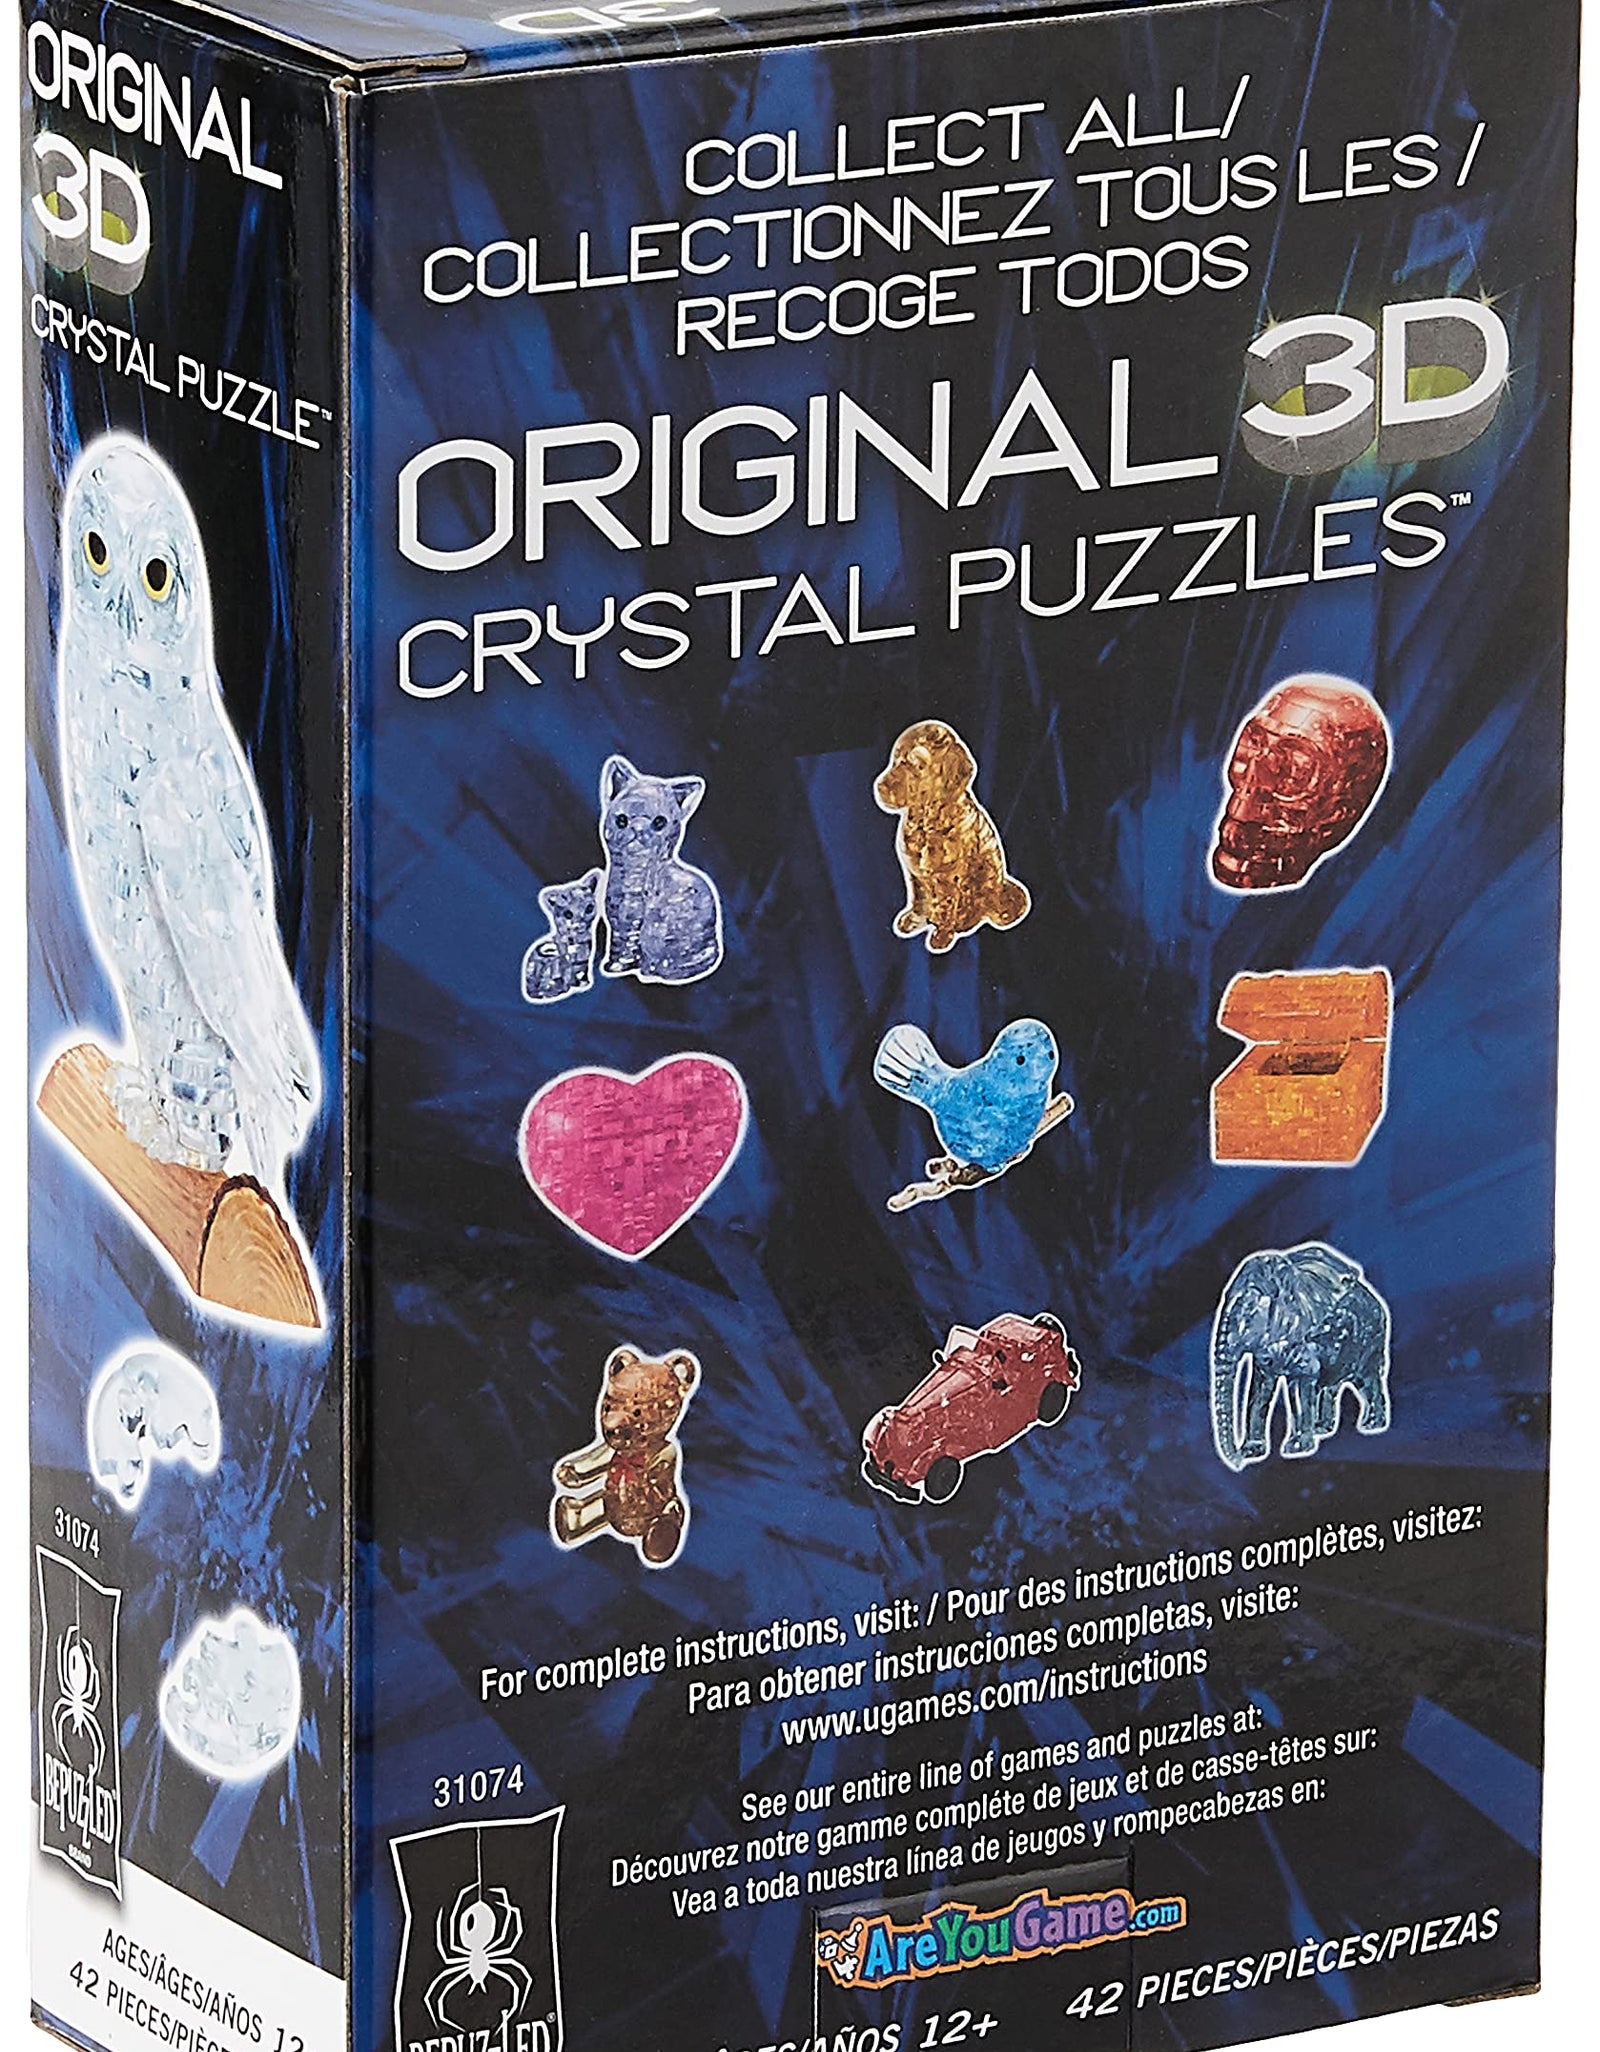 BePuzzled Original 3D Crystal Jigsaw Puzzle - Owl Animal Bird Assembly Brain Teaser, Fun Model Toy Gift Decoration for Adults & Kids Age 12 and Up, Clear, 42 Pieces (Level 1)